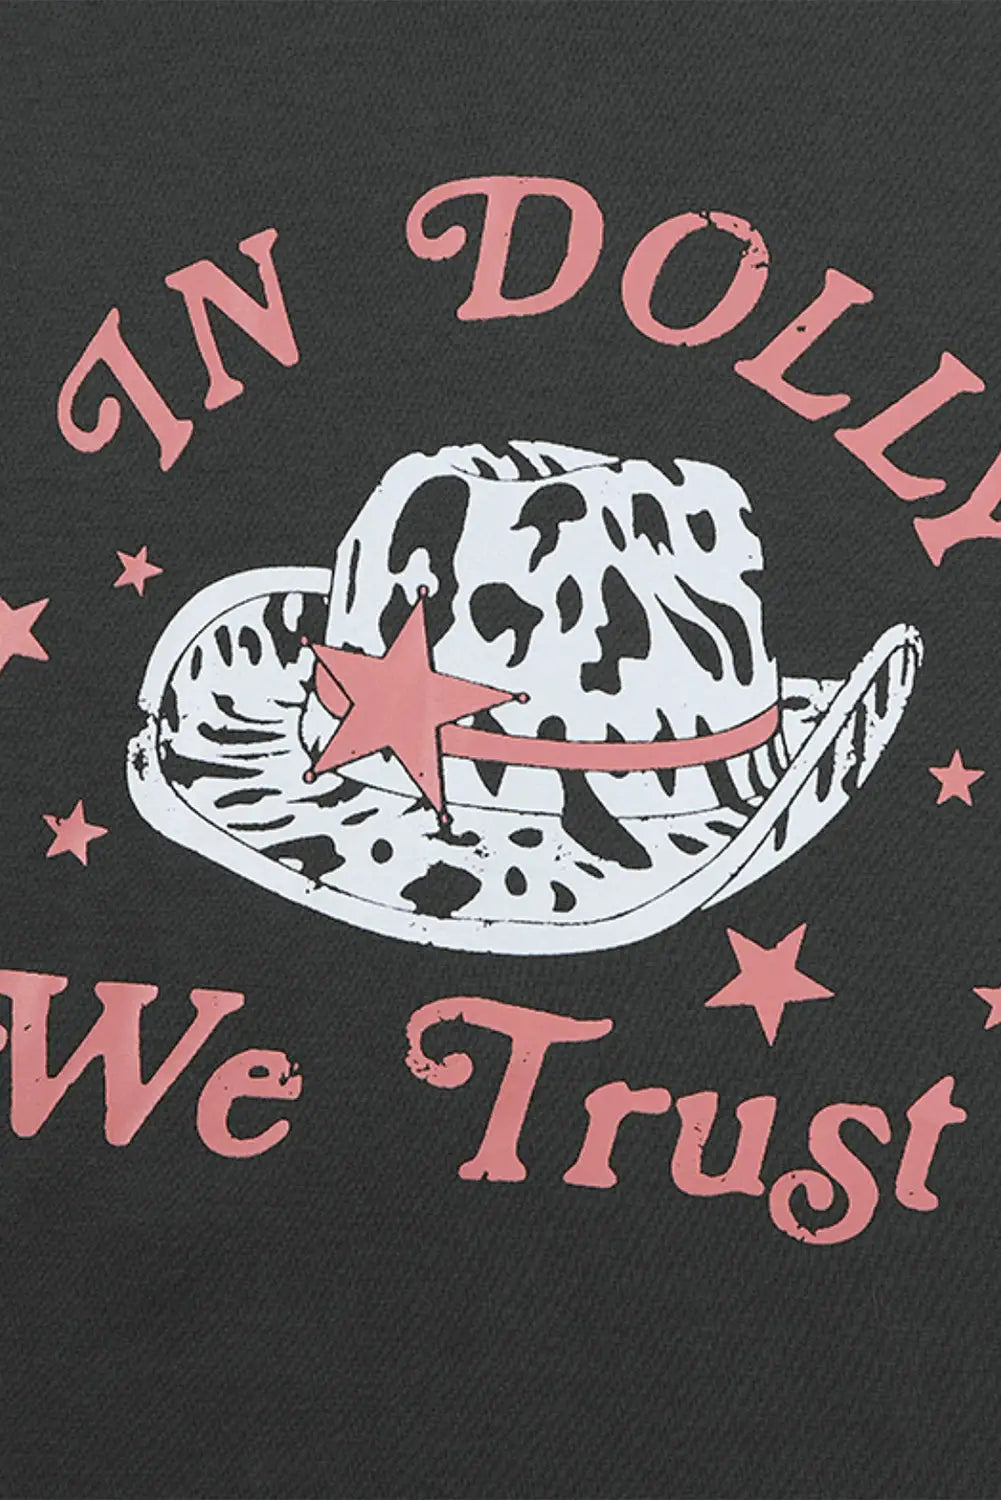 Gray we trust in dolly western fashion graphic tee - t-shirts